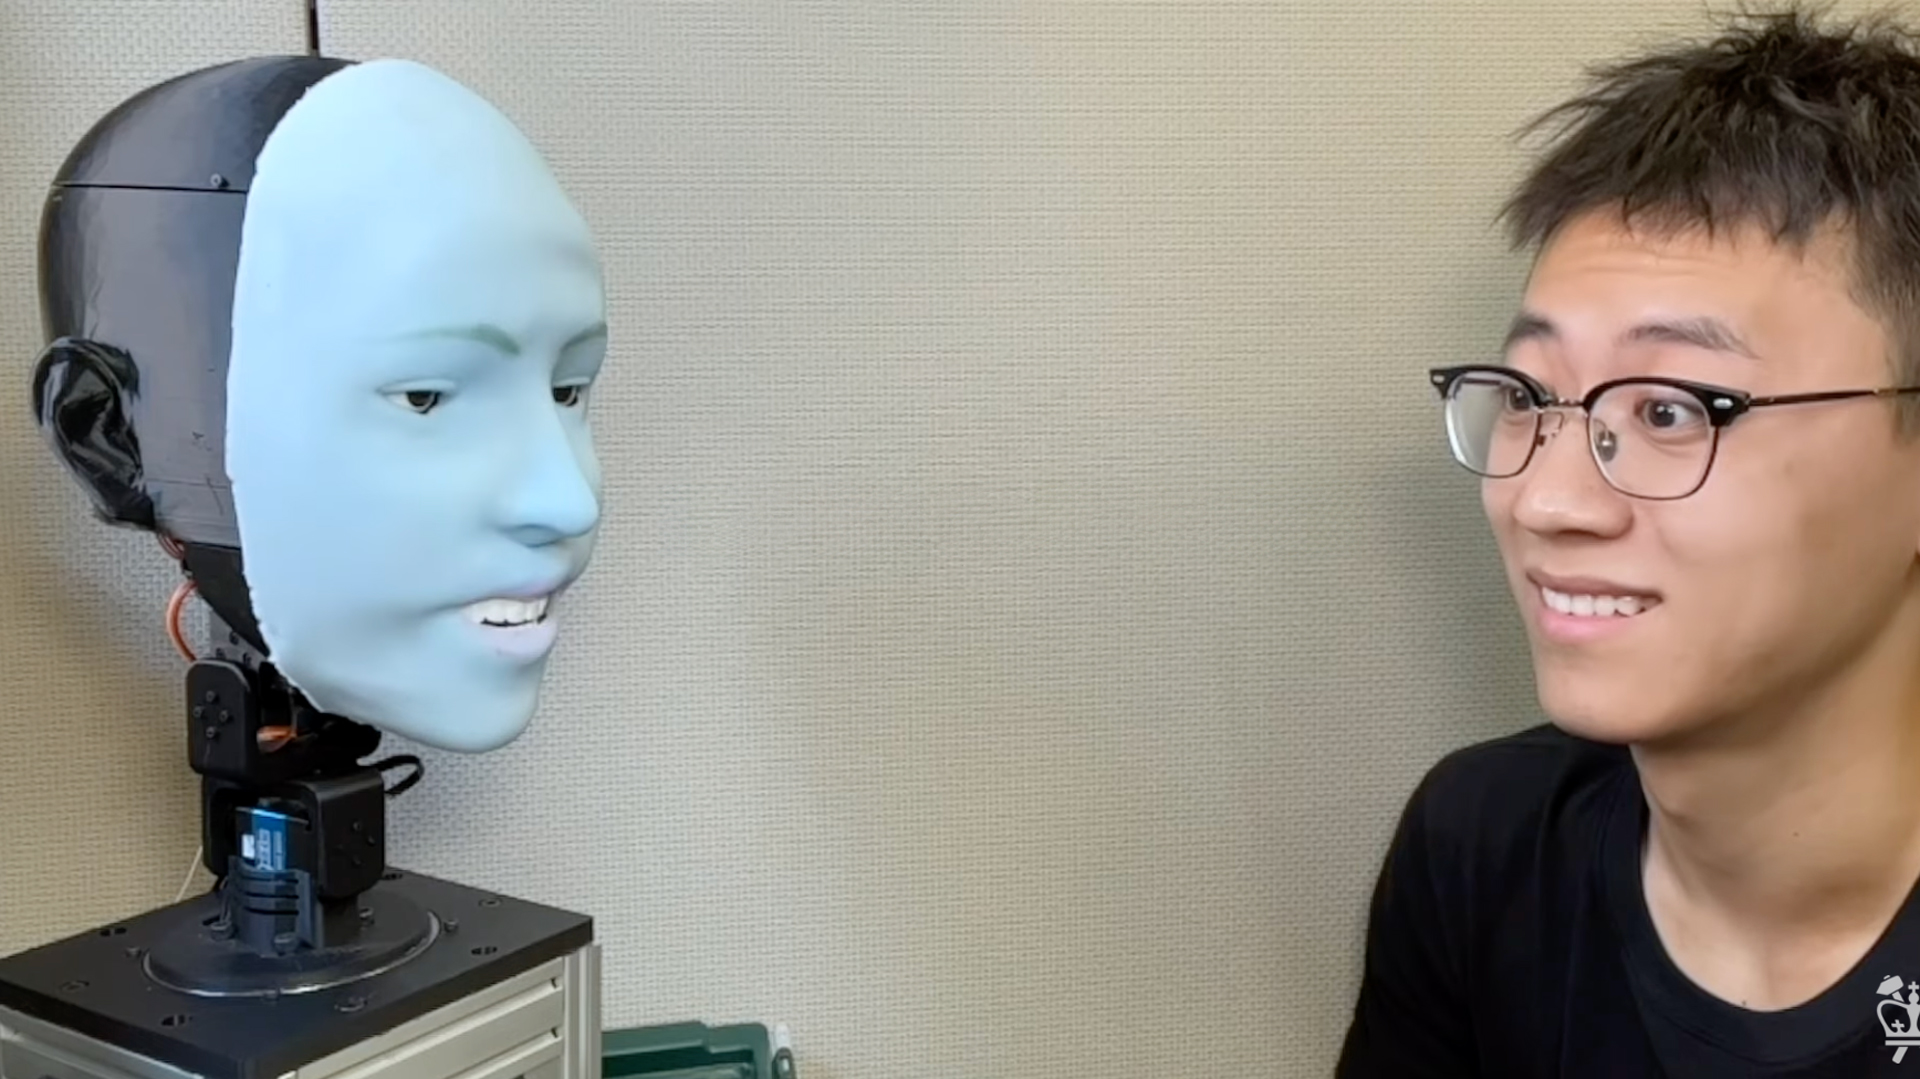 Expression-matching robot will haunt your dreams but someday it might be your only friend